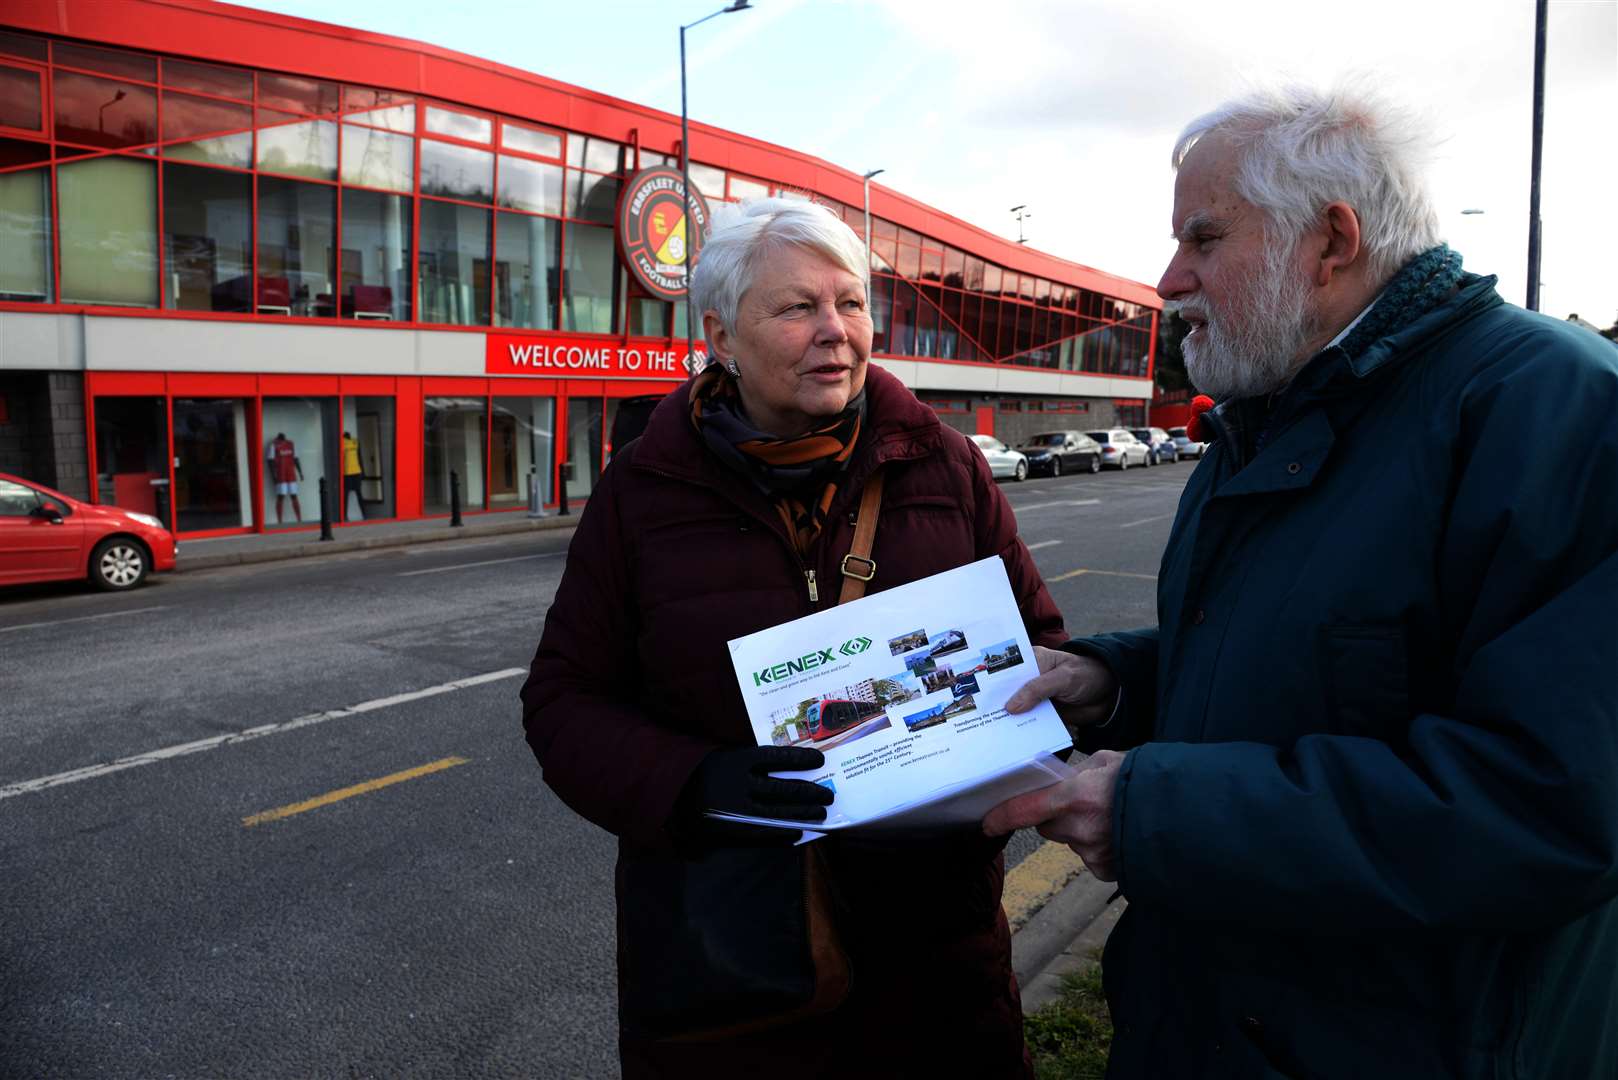 Baroness Randerson, discusses the plans for a new tram line with Prof Lewis Lesley at the proposed tram interchange in Stonebridge Road, Ebbsfleet